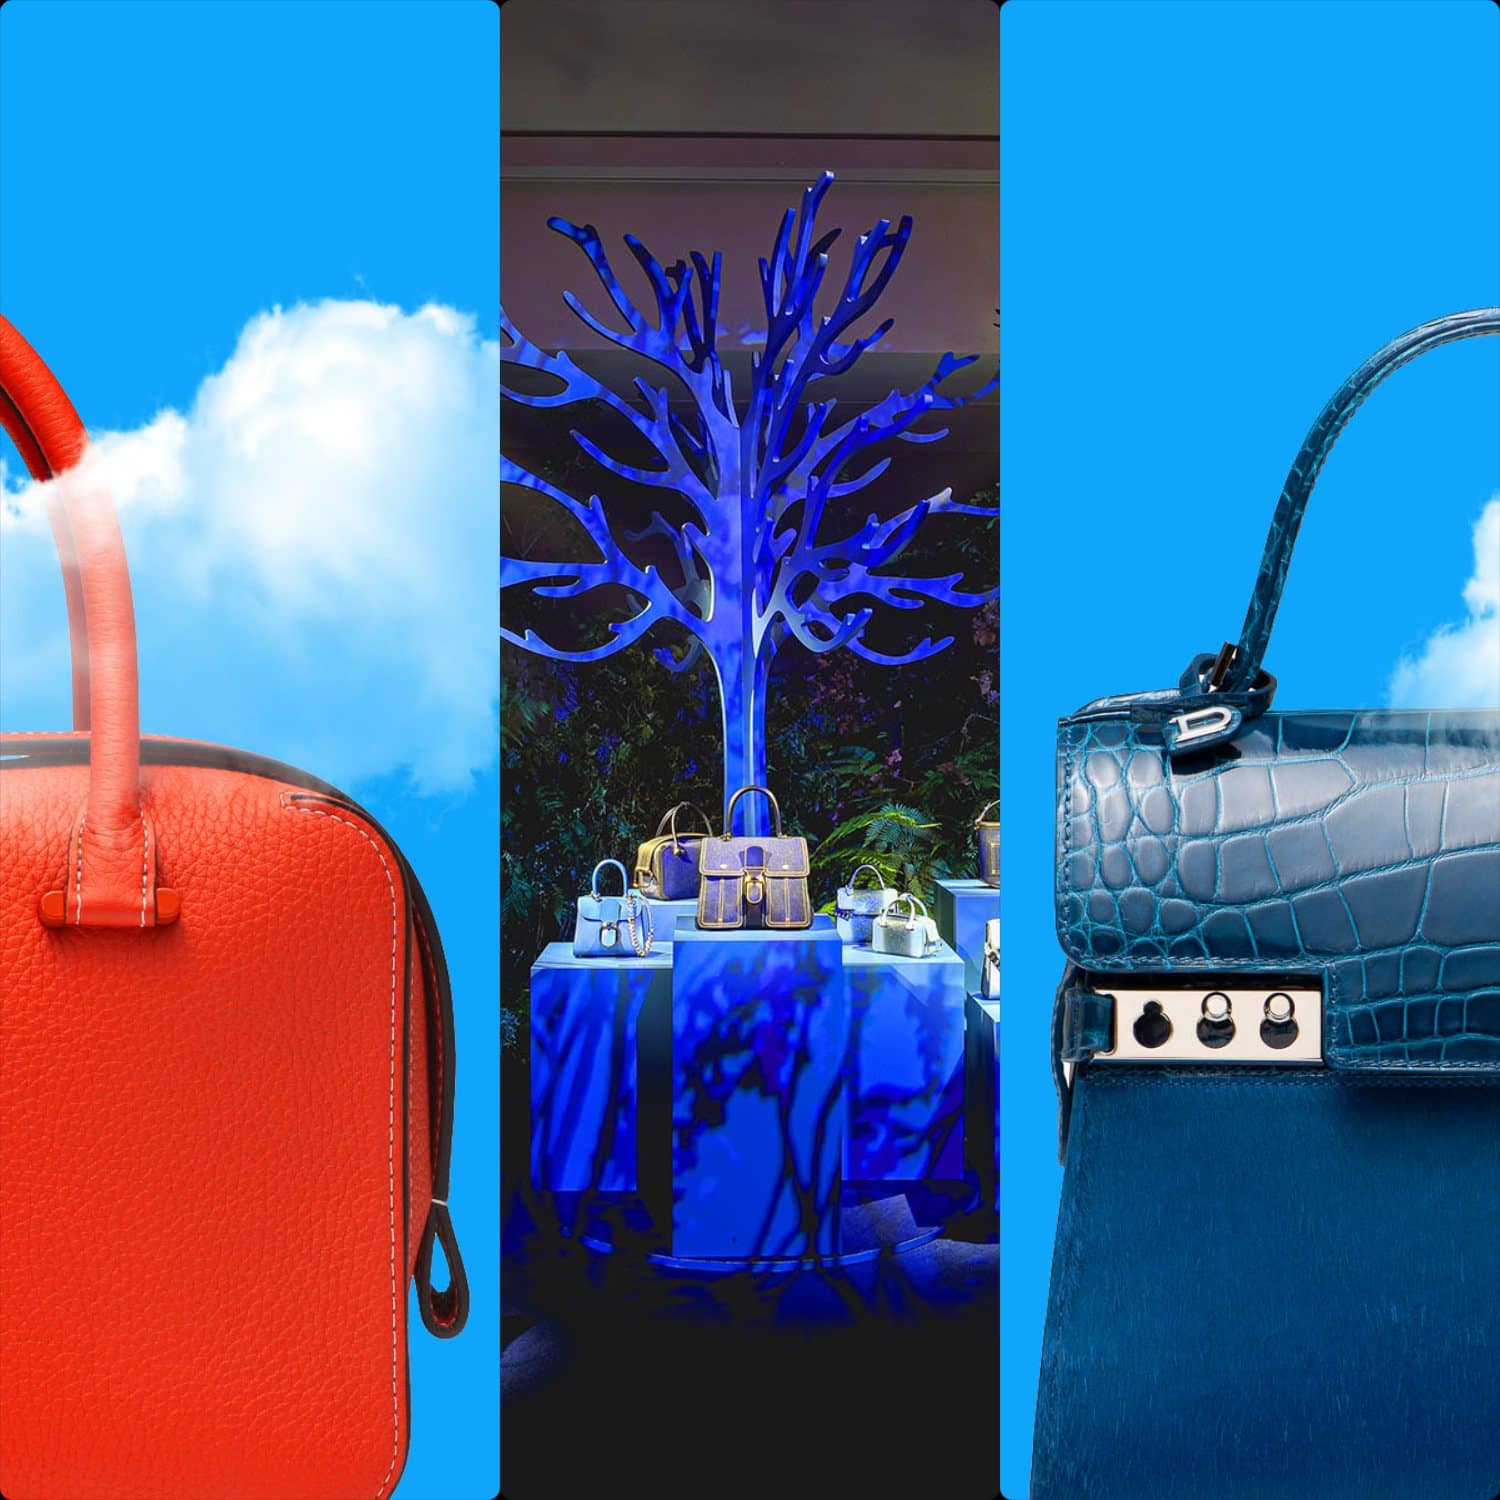 Delvaux: Constellations - Delvaux's End of Year Collection 2020